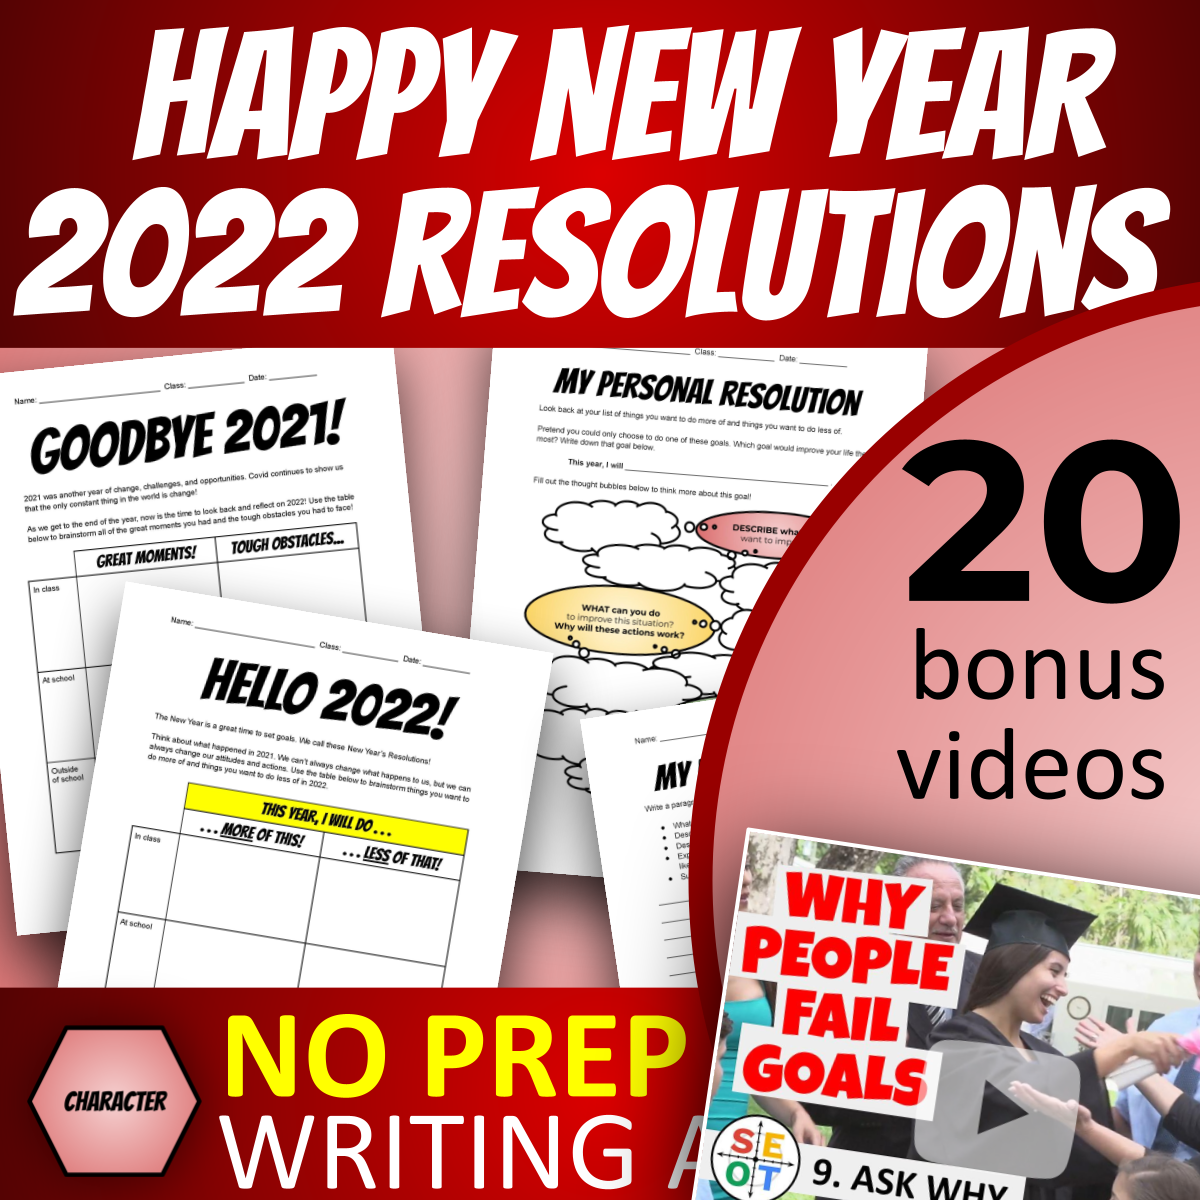 New Year Video 1 END